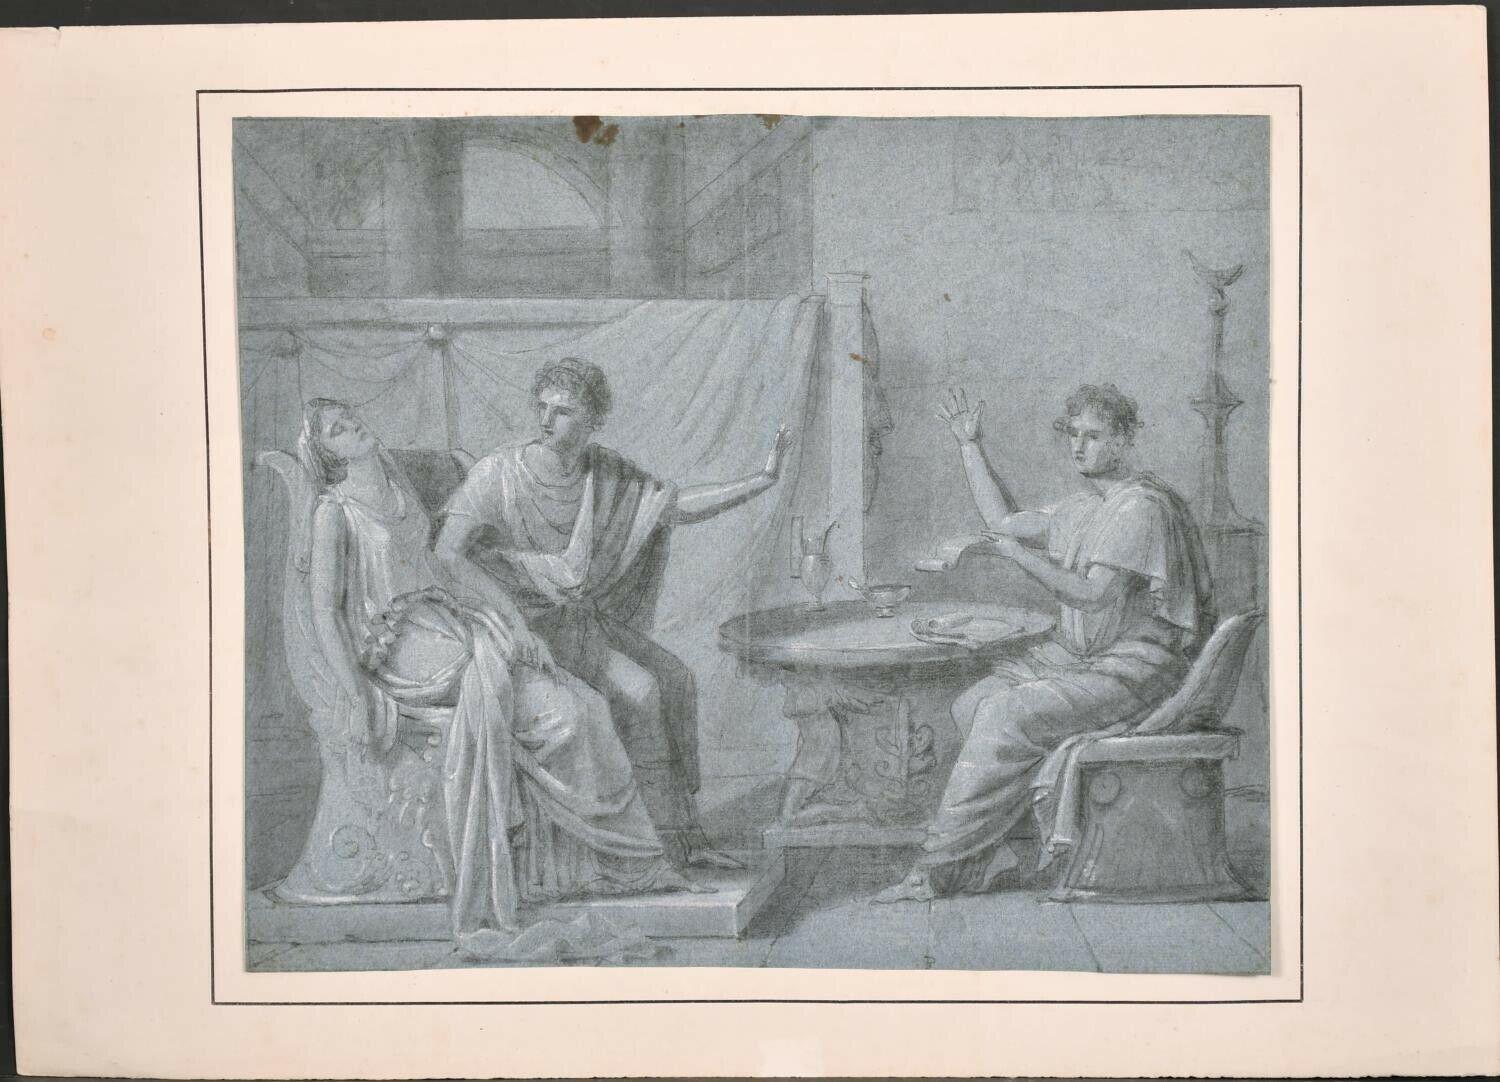 FINE 18th CENTURY OLD MASTER CHALK DRAWING - ROMANESQUE FIGURES INTERIOR SCENE - Painting by Unknown